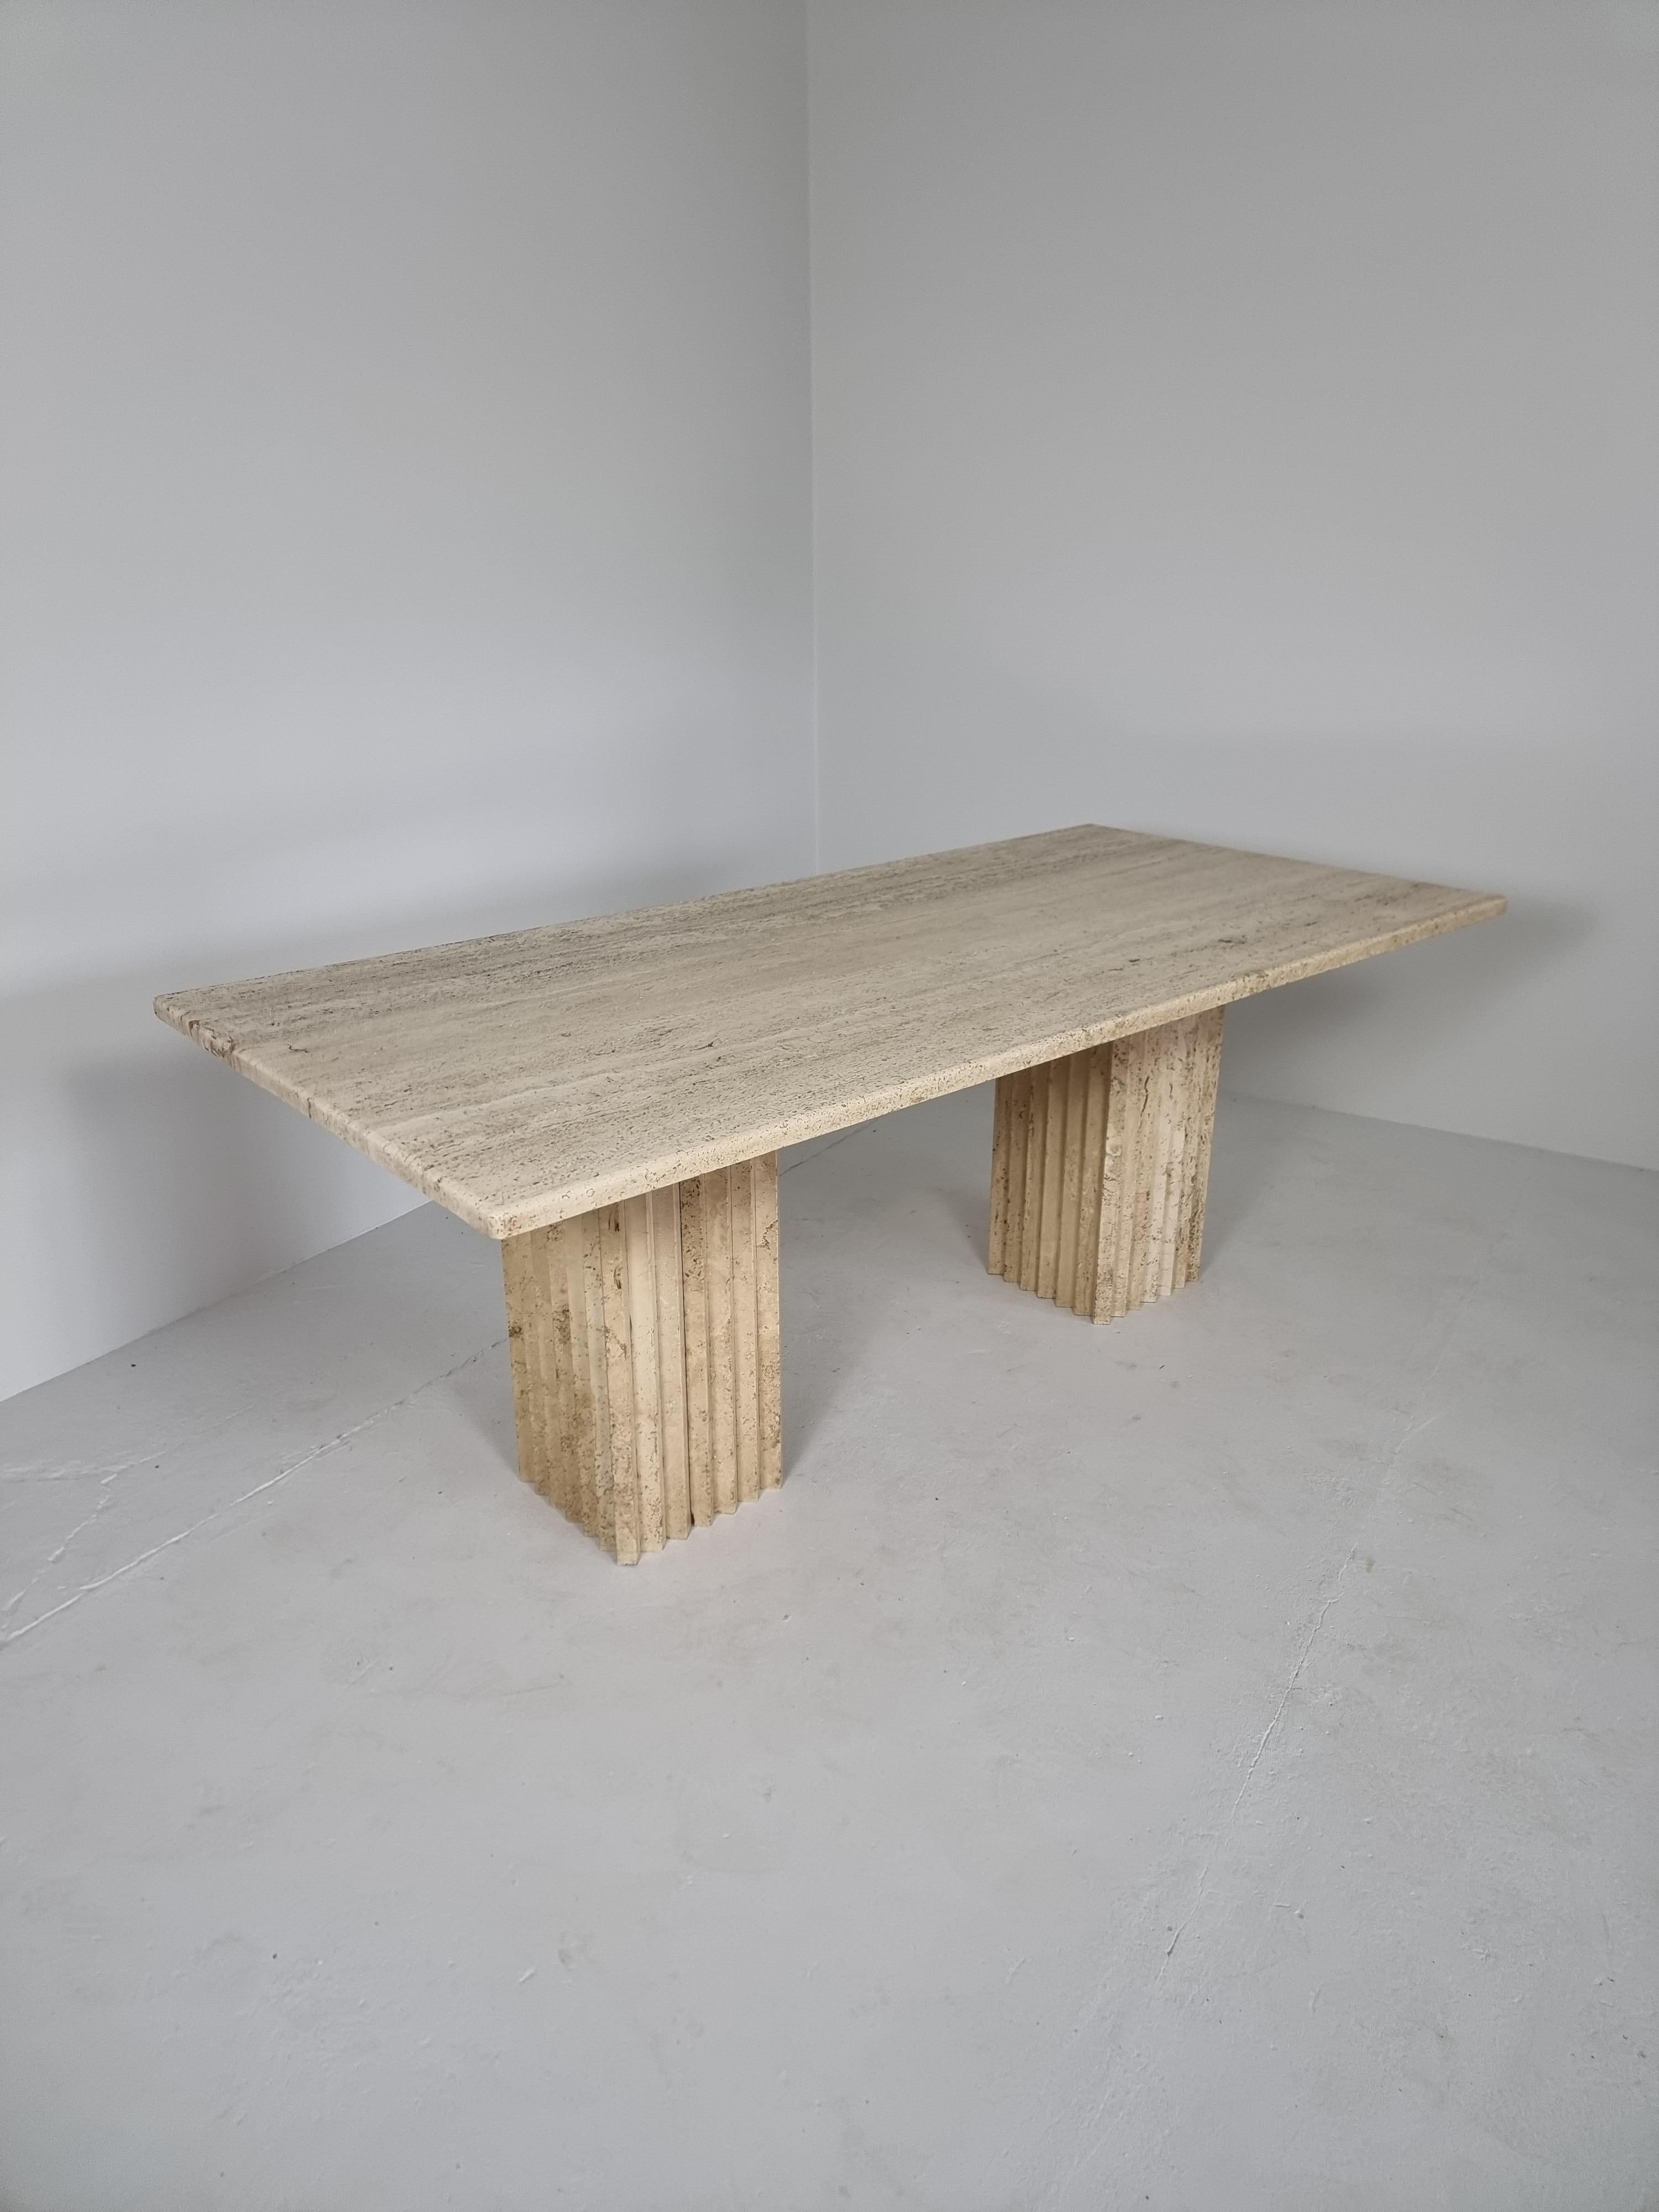 Postmodern piece in travertine marble that can be used as a writing desk or dining table. Fits 6 to 8 persons.

The two impressive columns are not attached to the table, these can be placed freely underneath the top.

You could also turn them